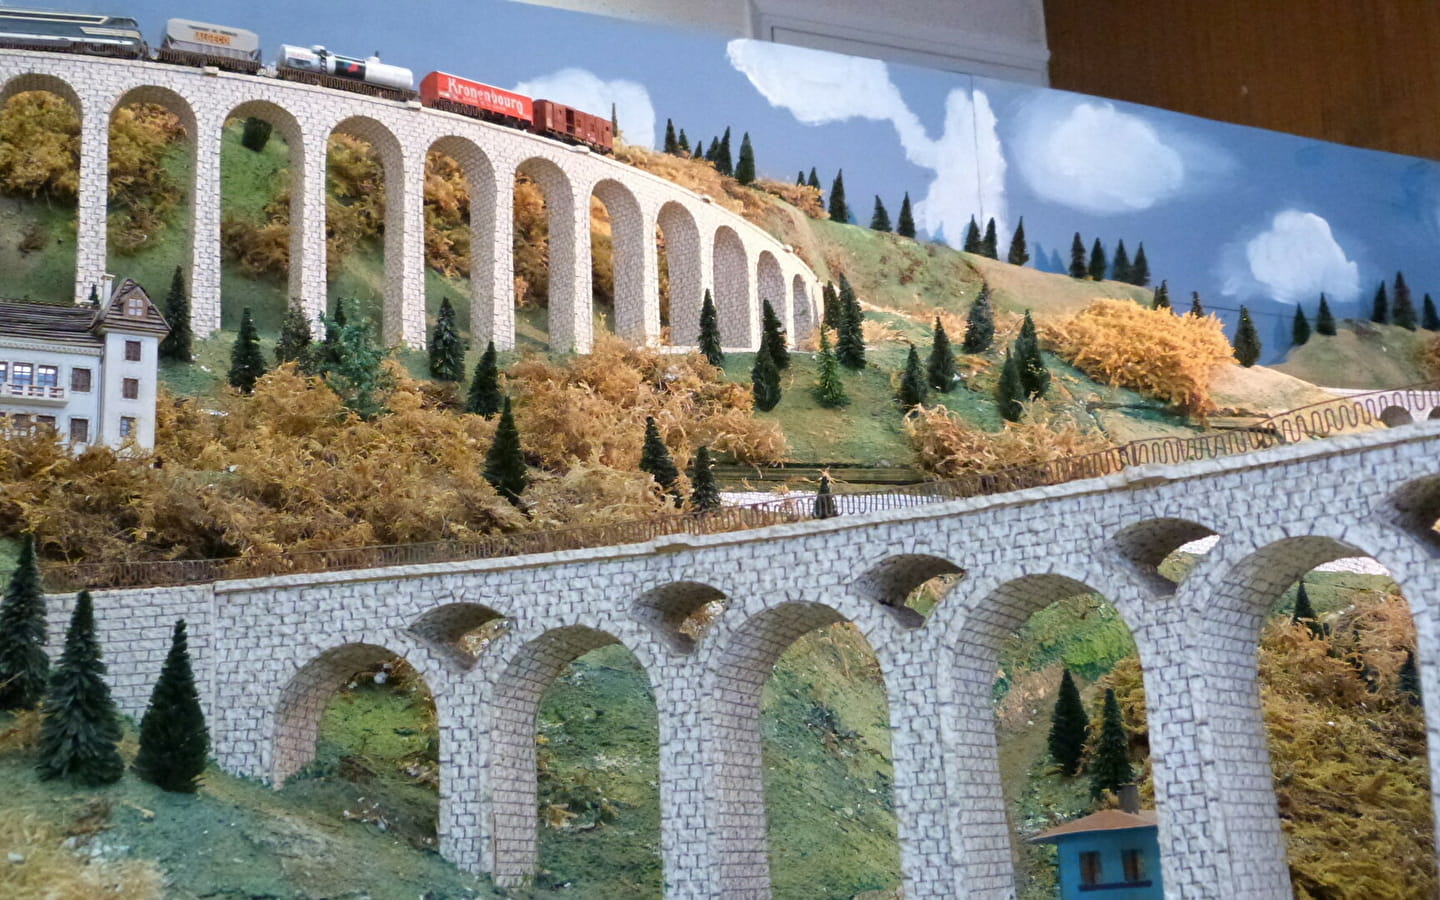 Exhibition of the model of the viaducts